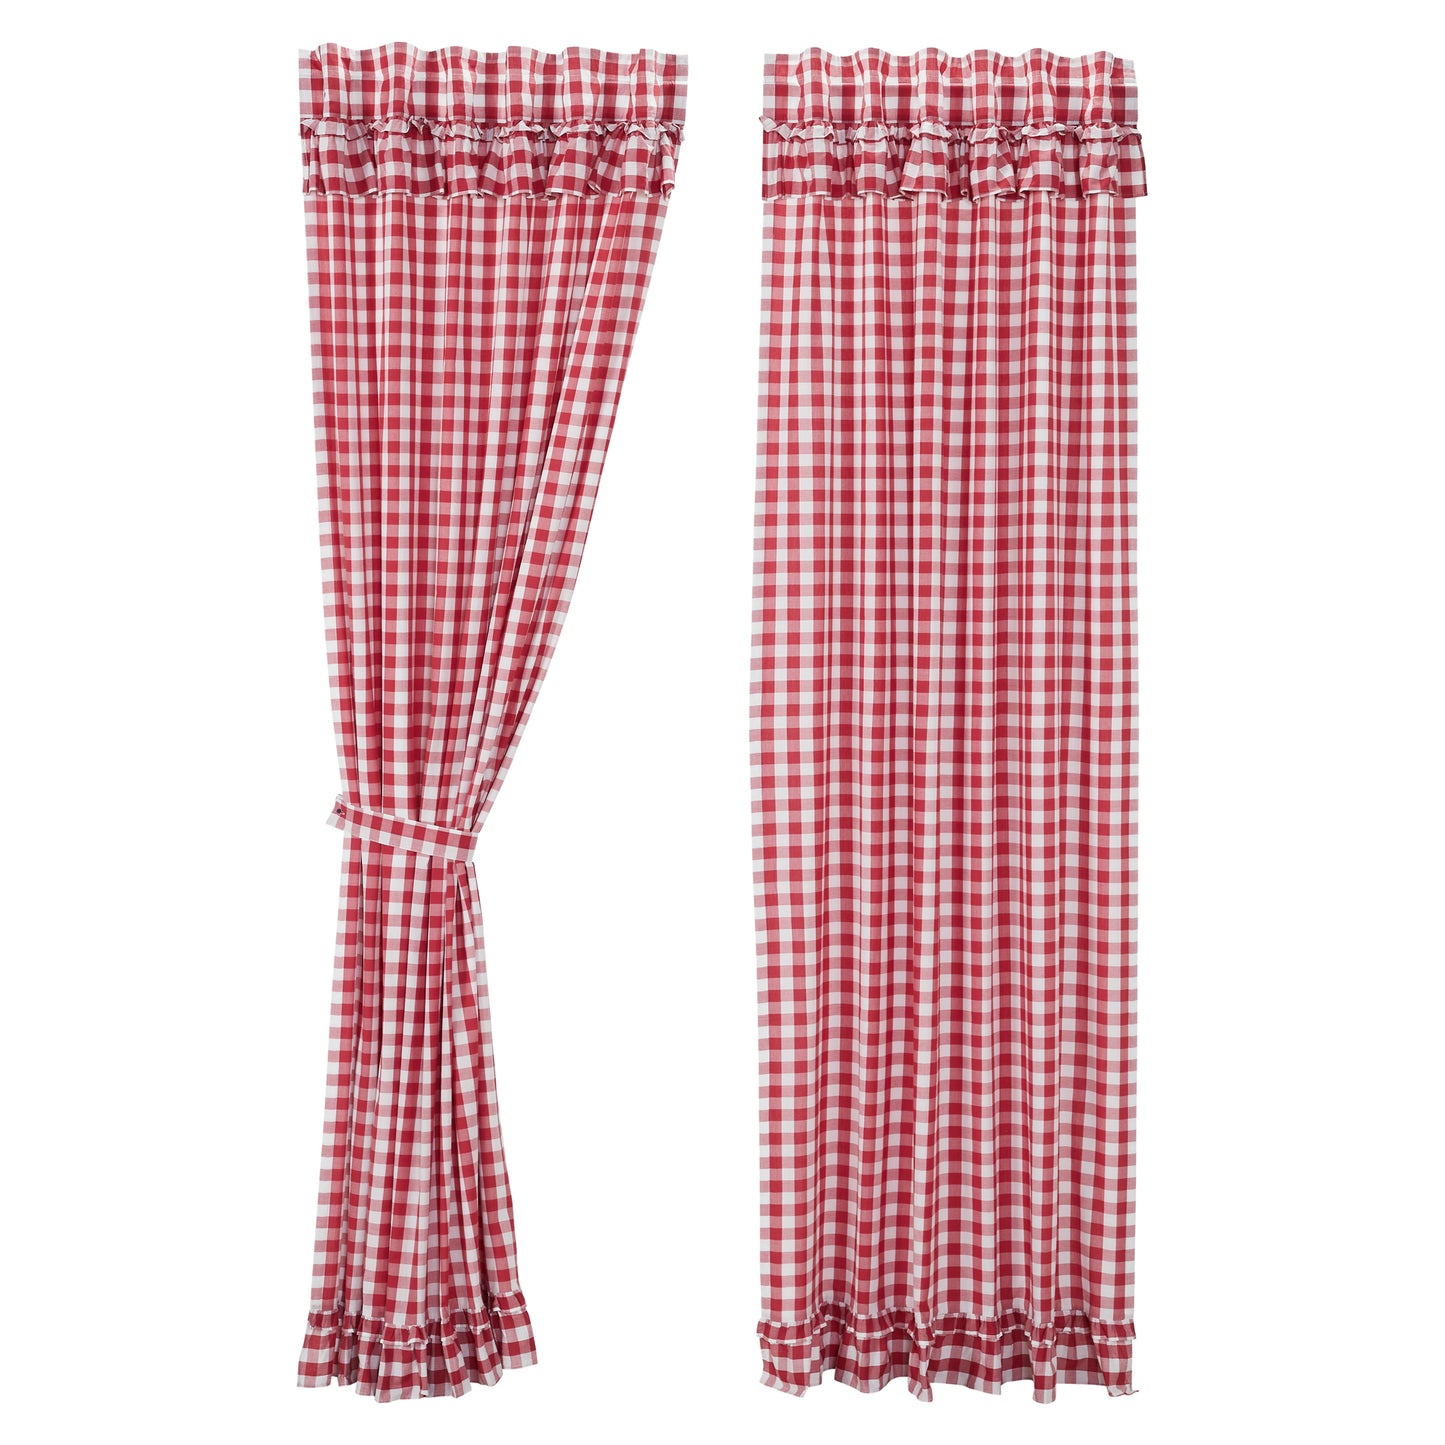 81488-Annie-Buffalo-Red-Check-Ruffled-Panel-Set-of-2-96x50-image-7